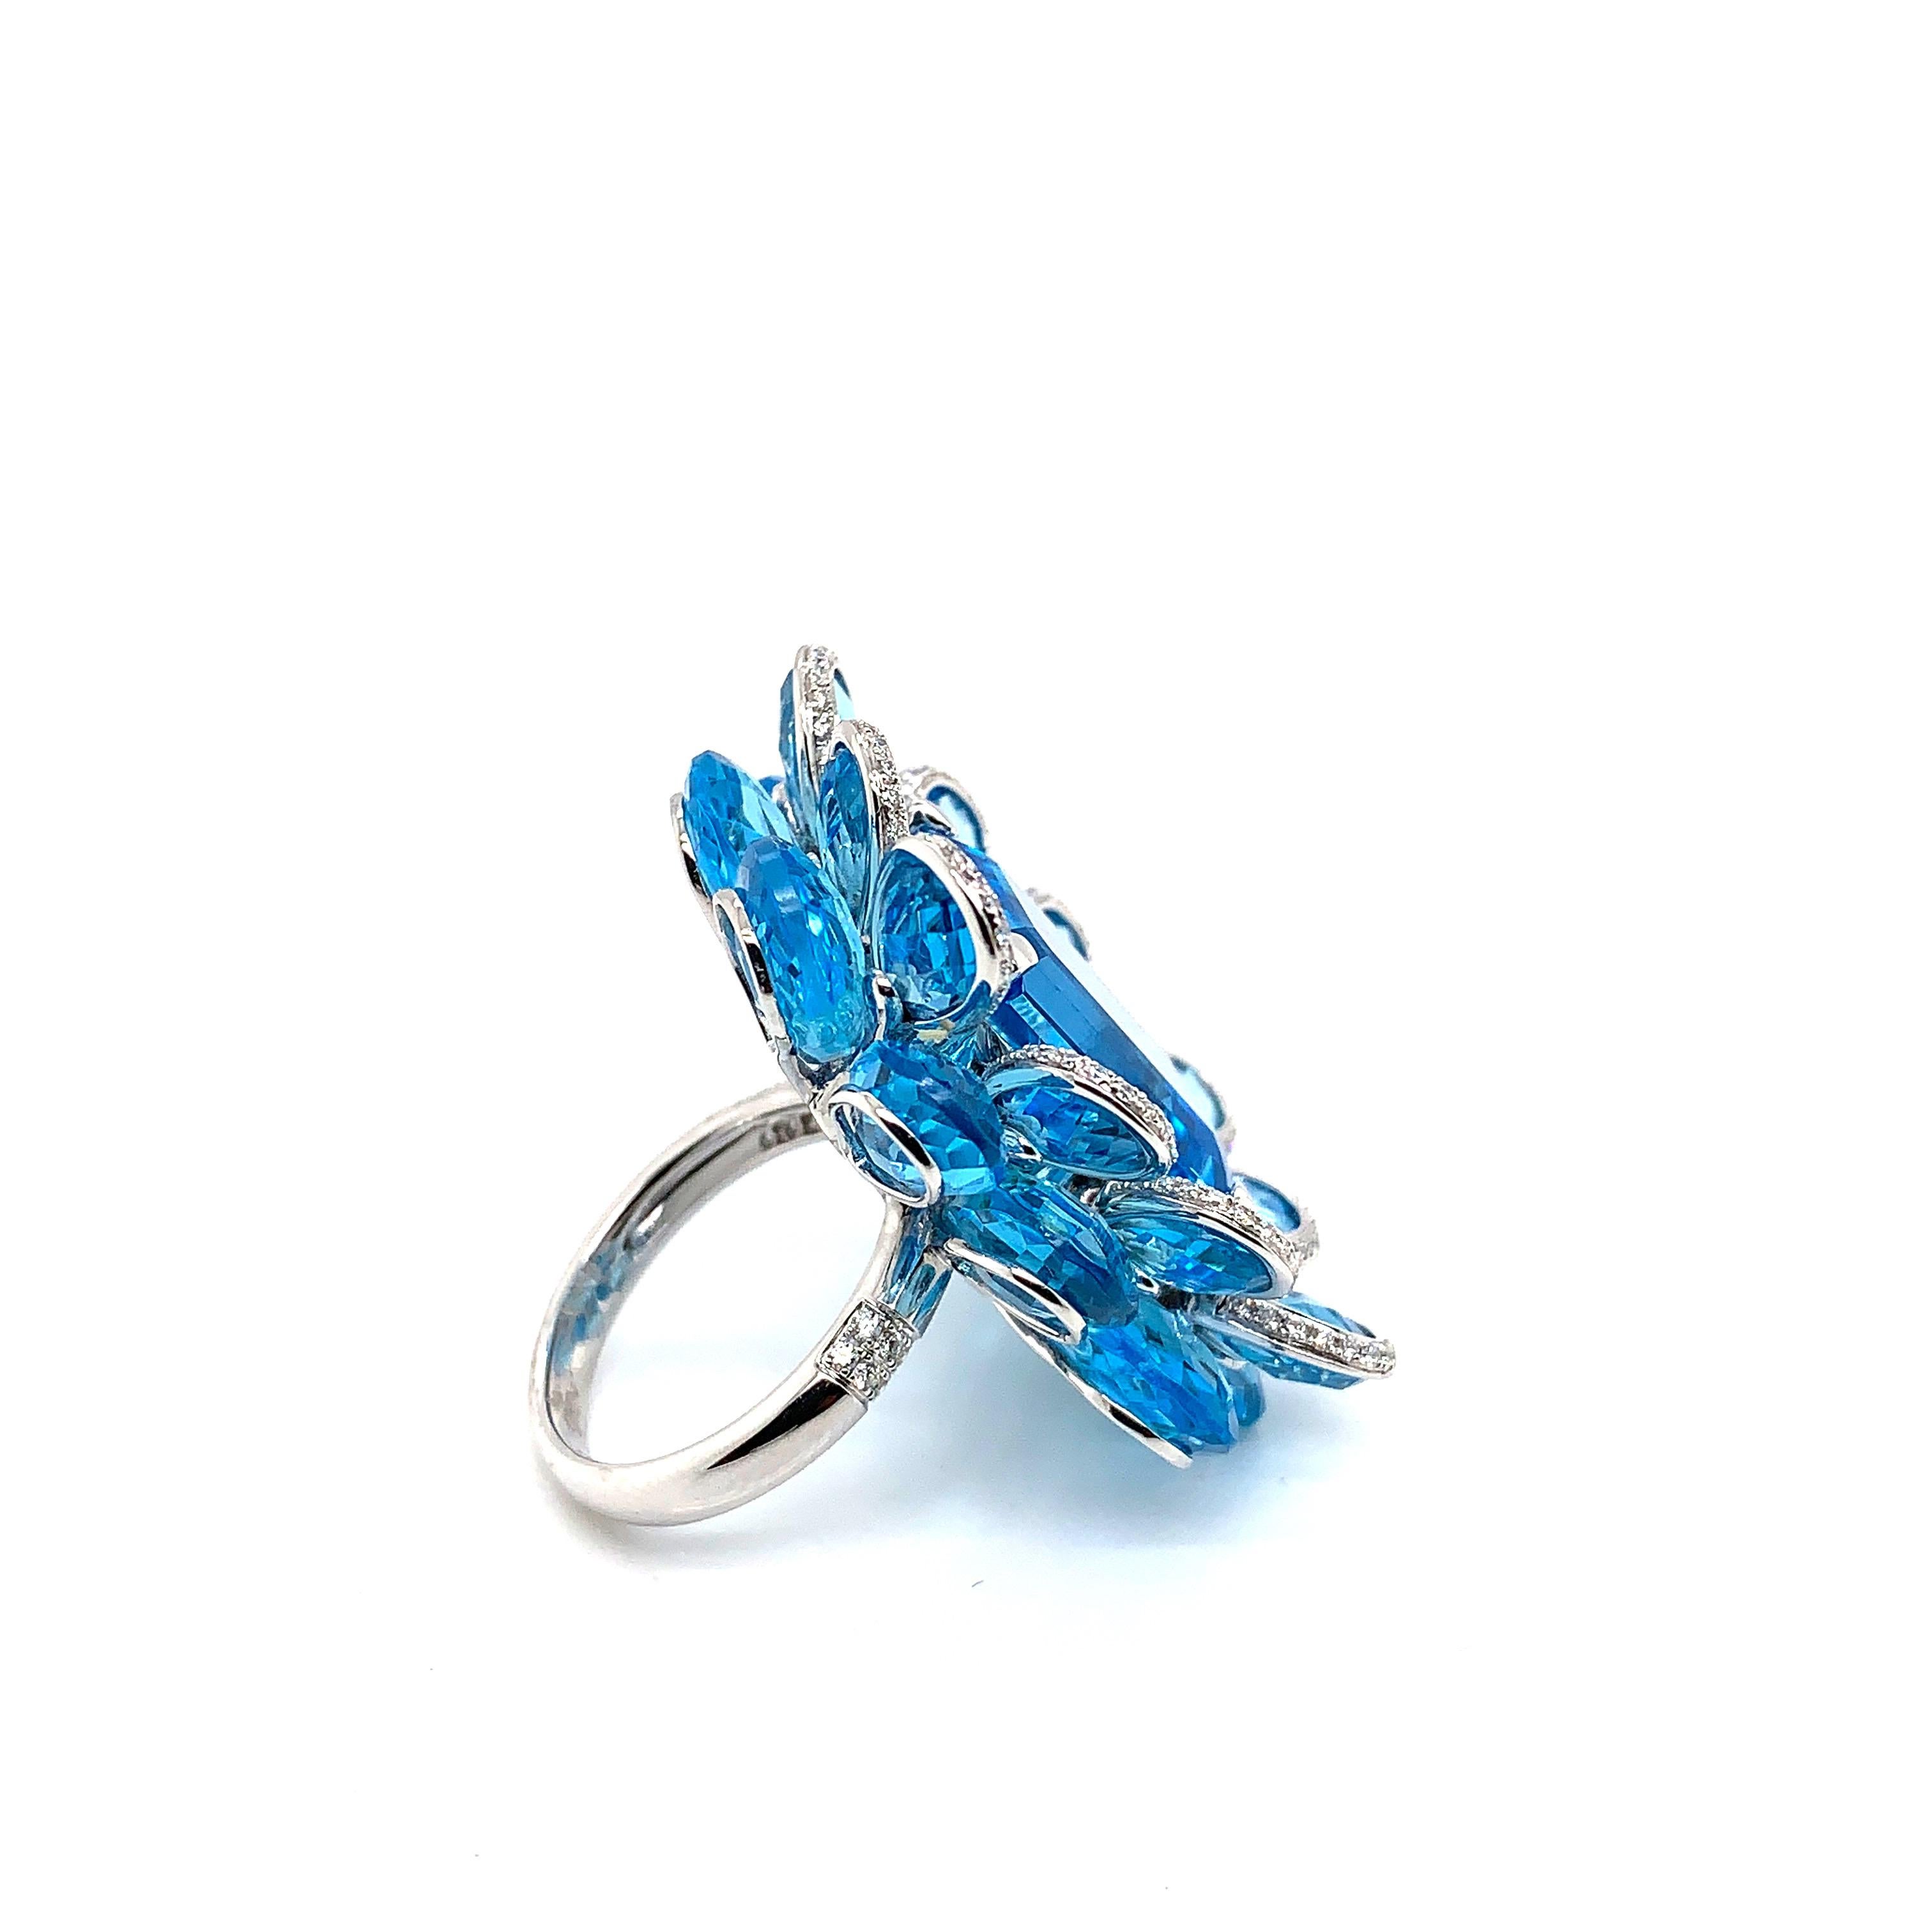 21.5 Carat Blue Topaz and Diamond Floral Ring in 18 Karat White Gold For Sale 1